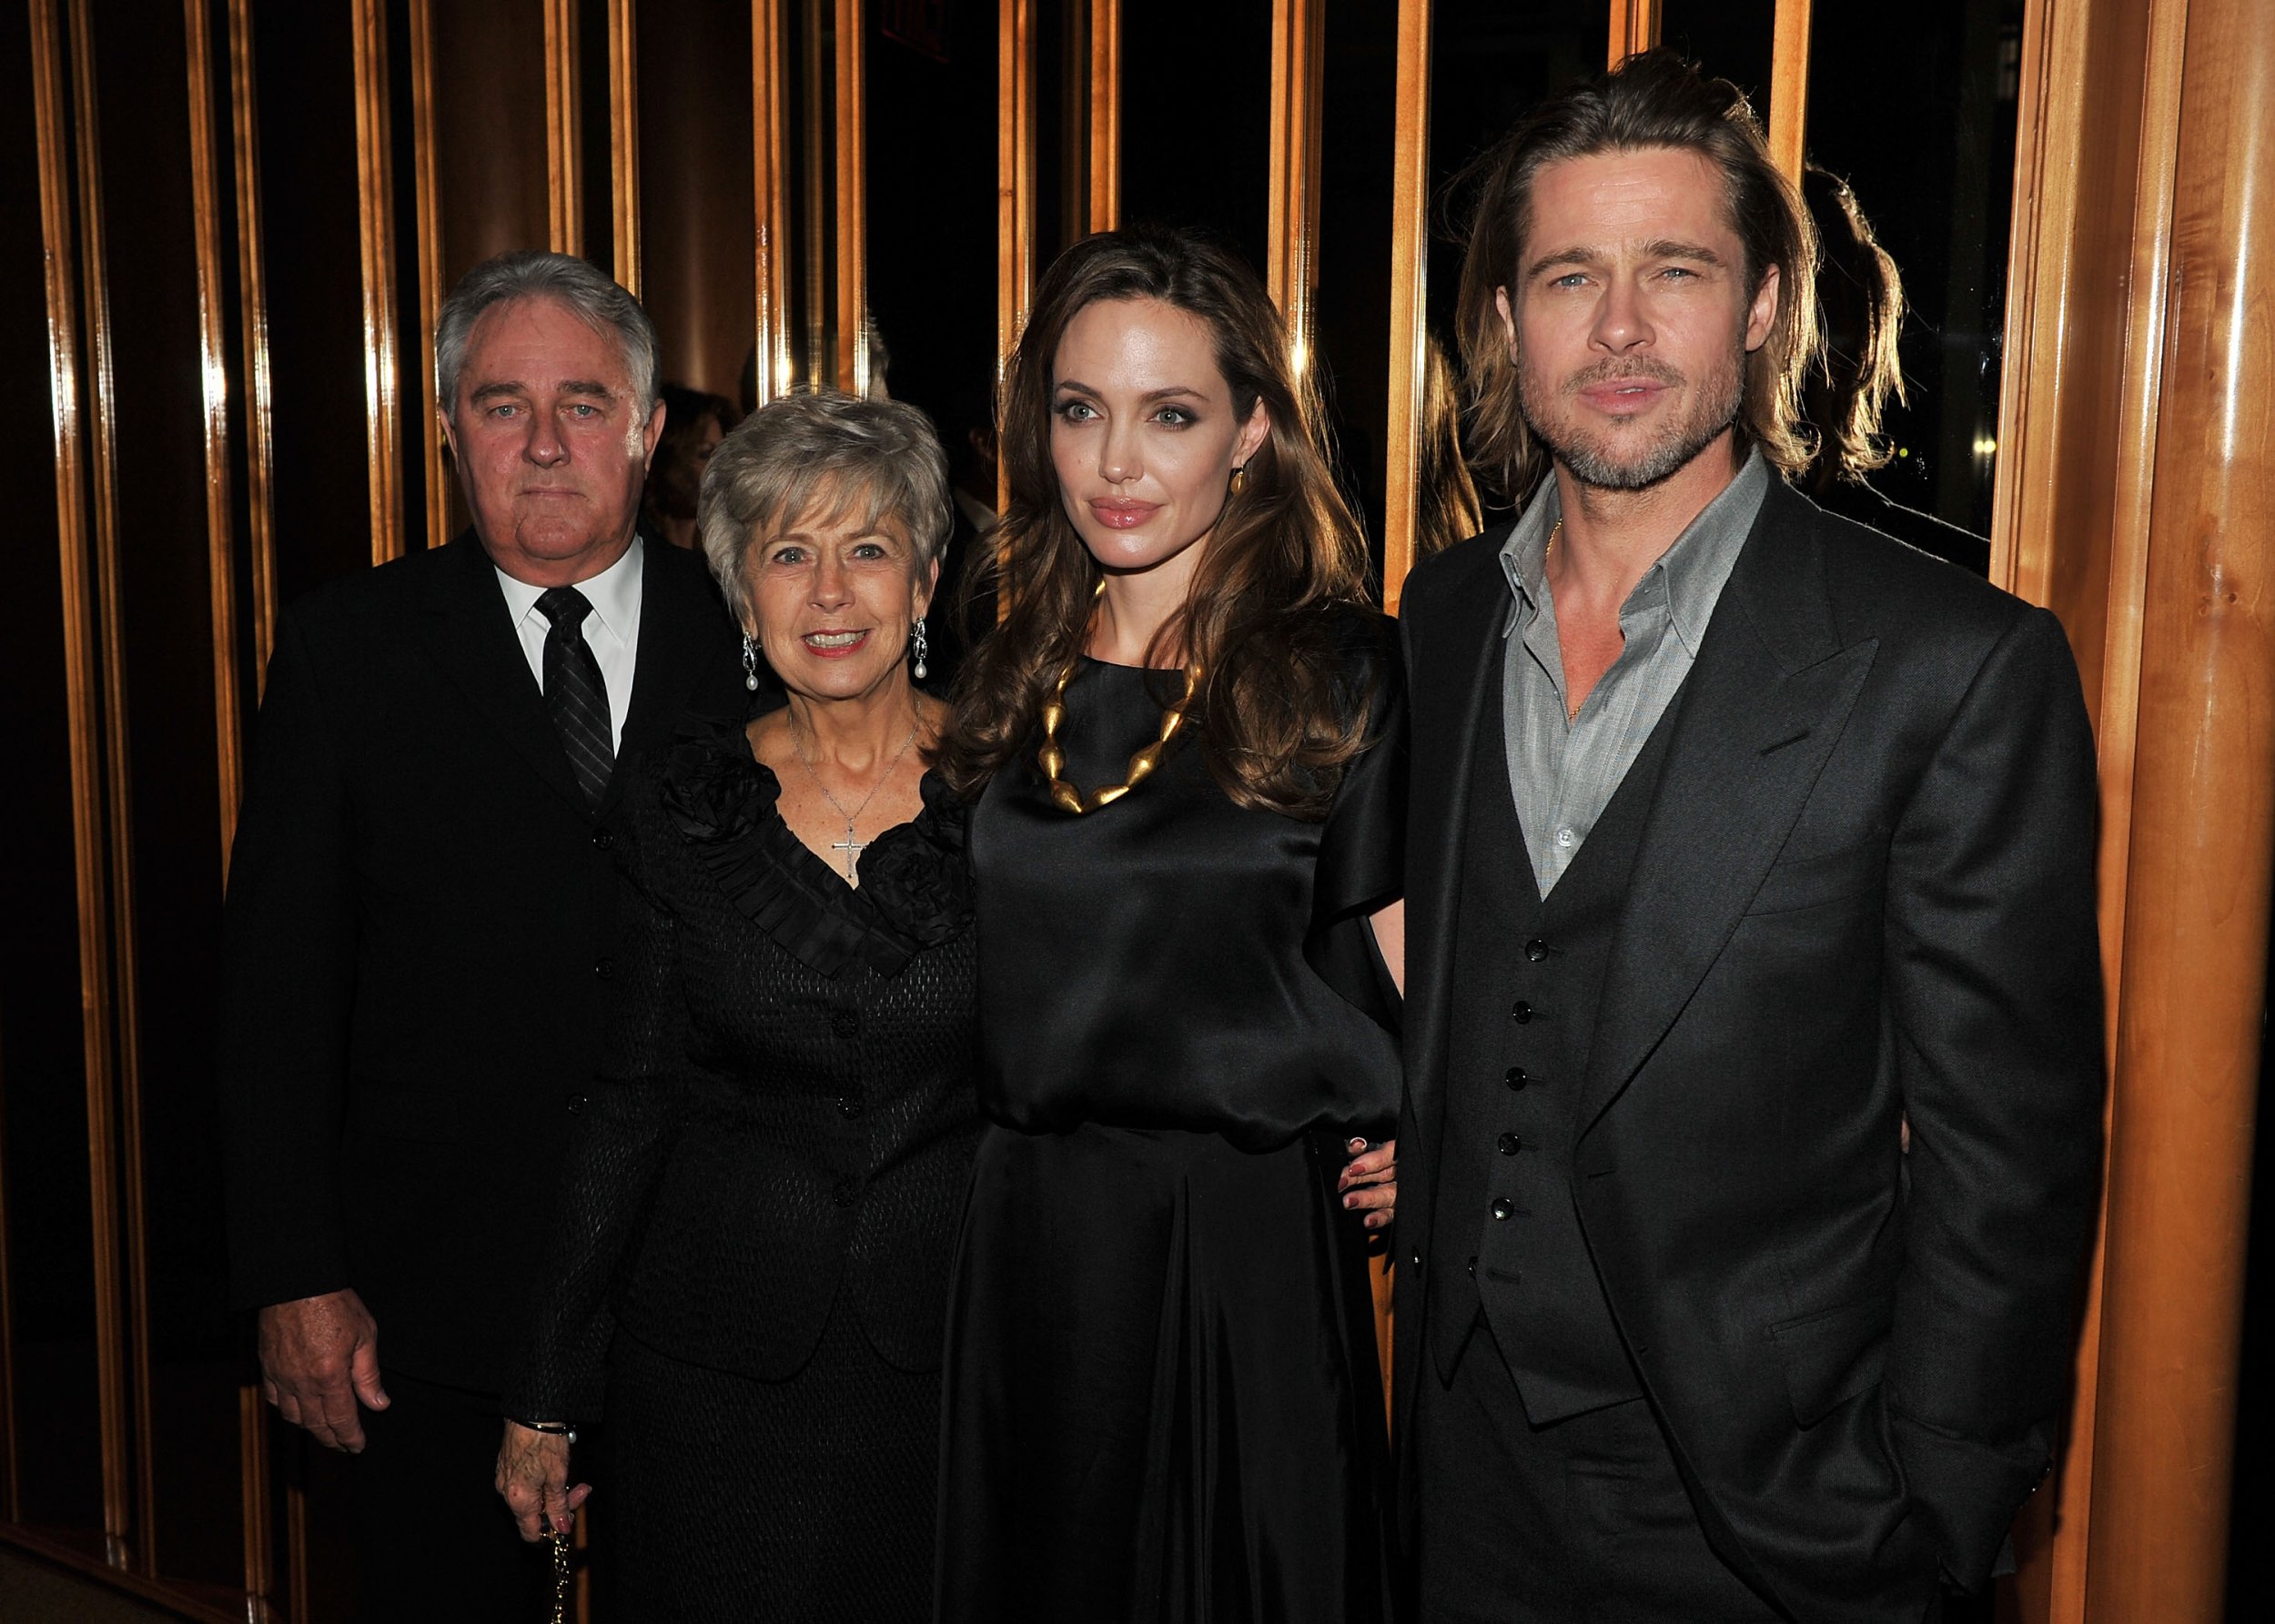 All About Brad Pitt's Parents, William and Jane Pitt